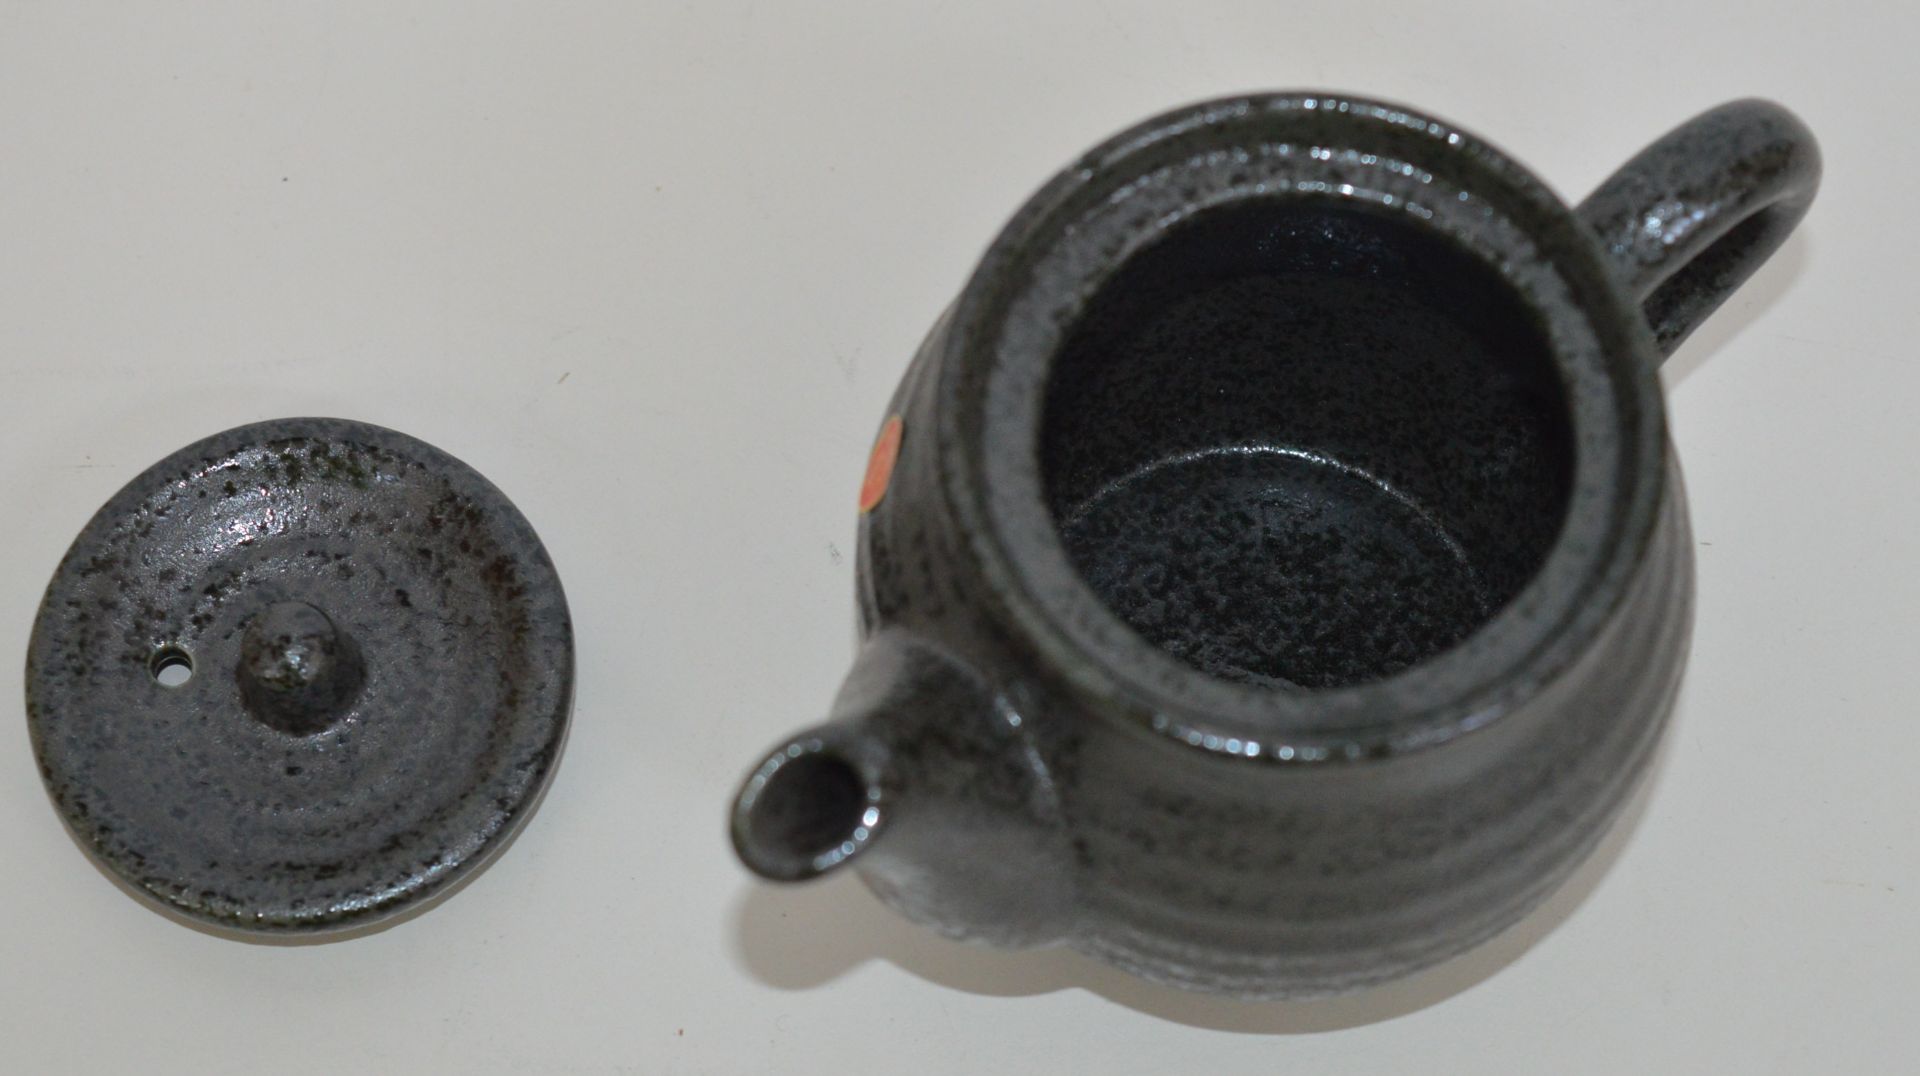 17 x Small Japanese Teapots - Premium Quality - Made in Japan - CL158 - Includes Lids - 7.5cm Tall - - Image 6 of 6